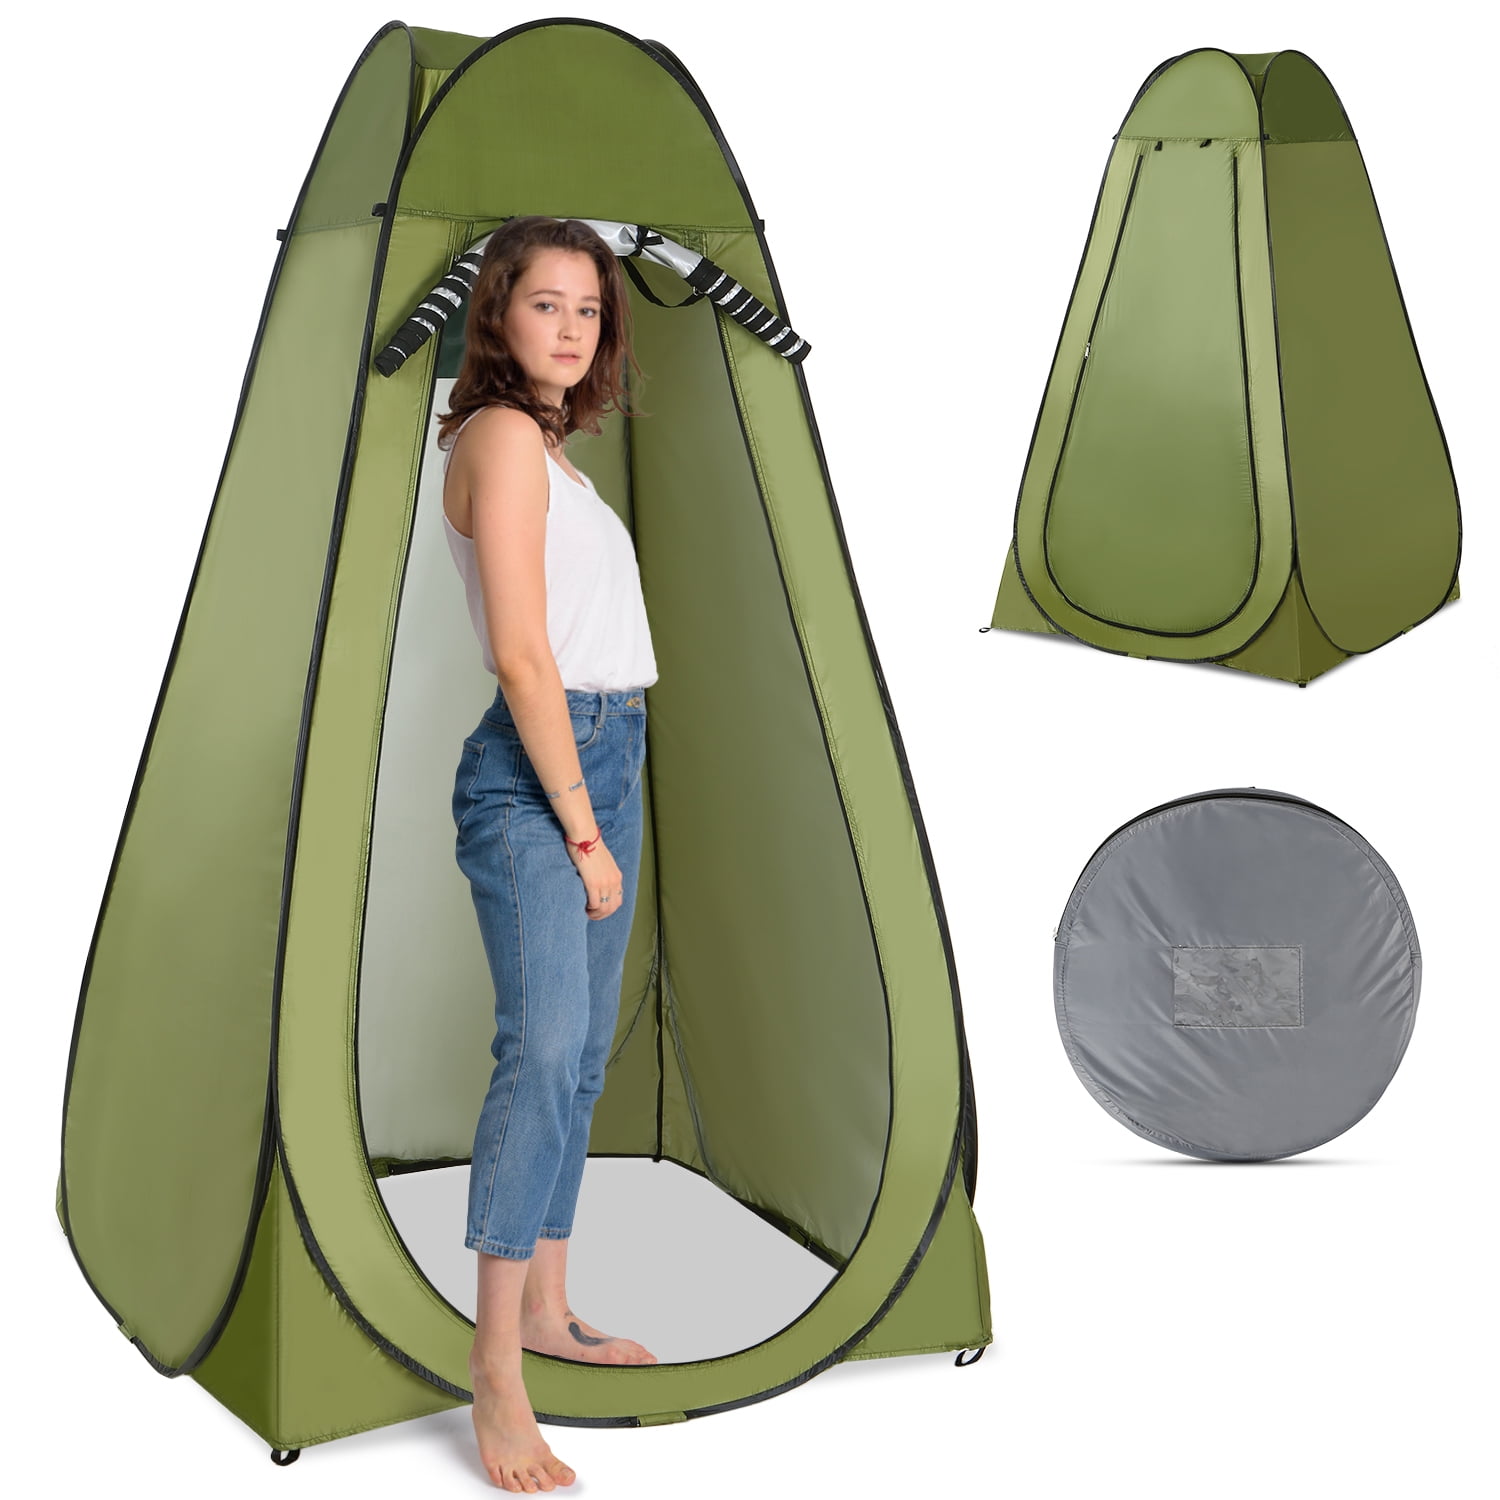 190CM Outdoor Portable ChangingTent Instant Pop Up Privacy Camping Shower Toilet 